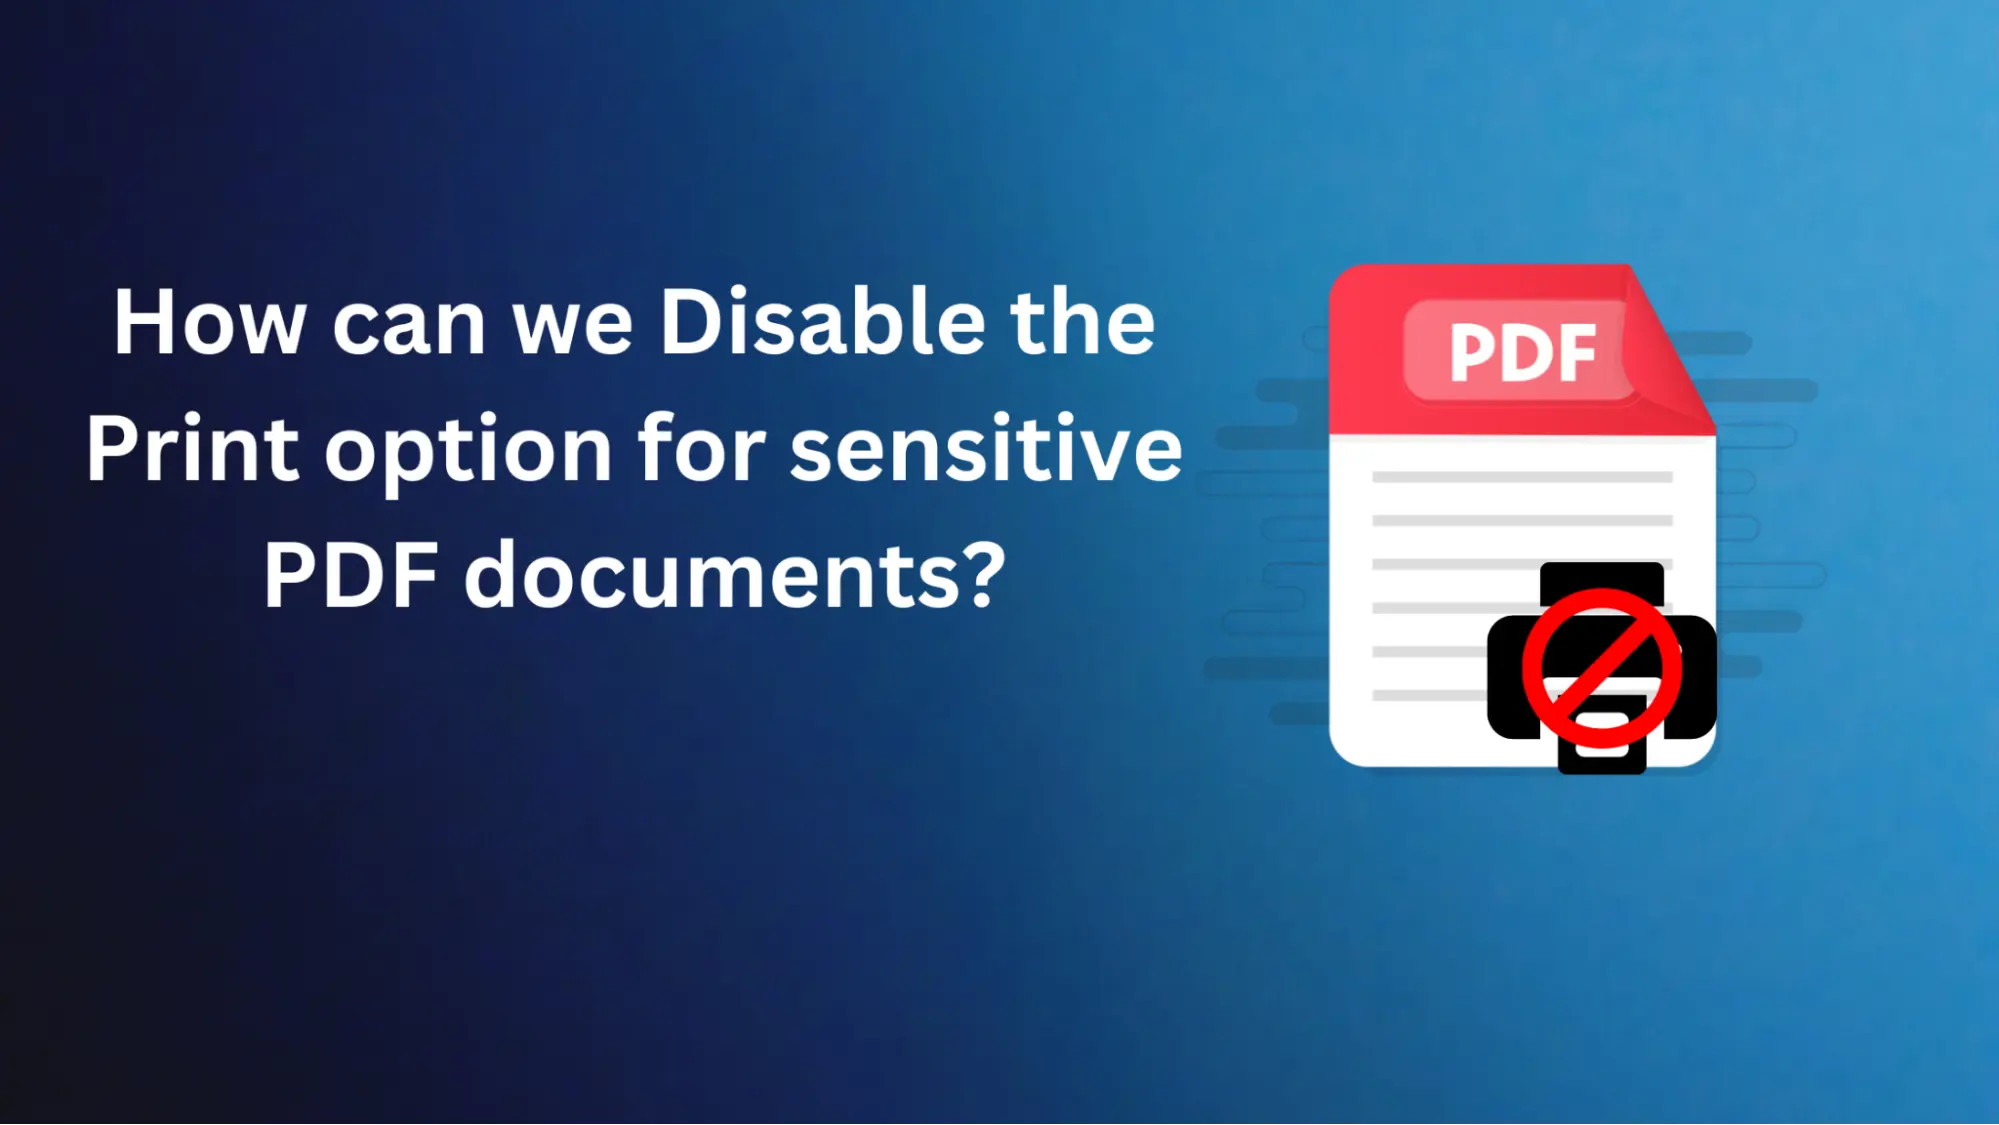 How to Delete pages from PDF without using Acrobat?